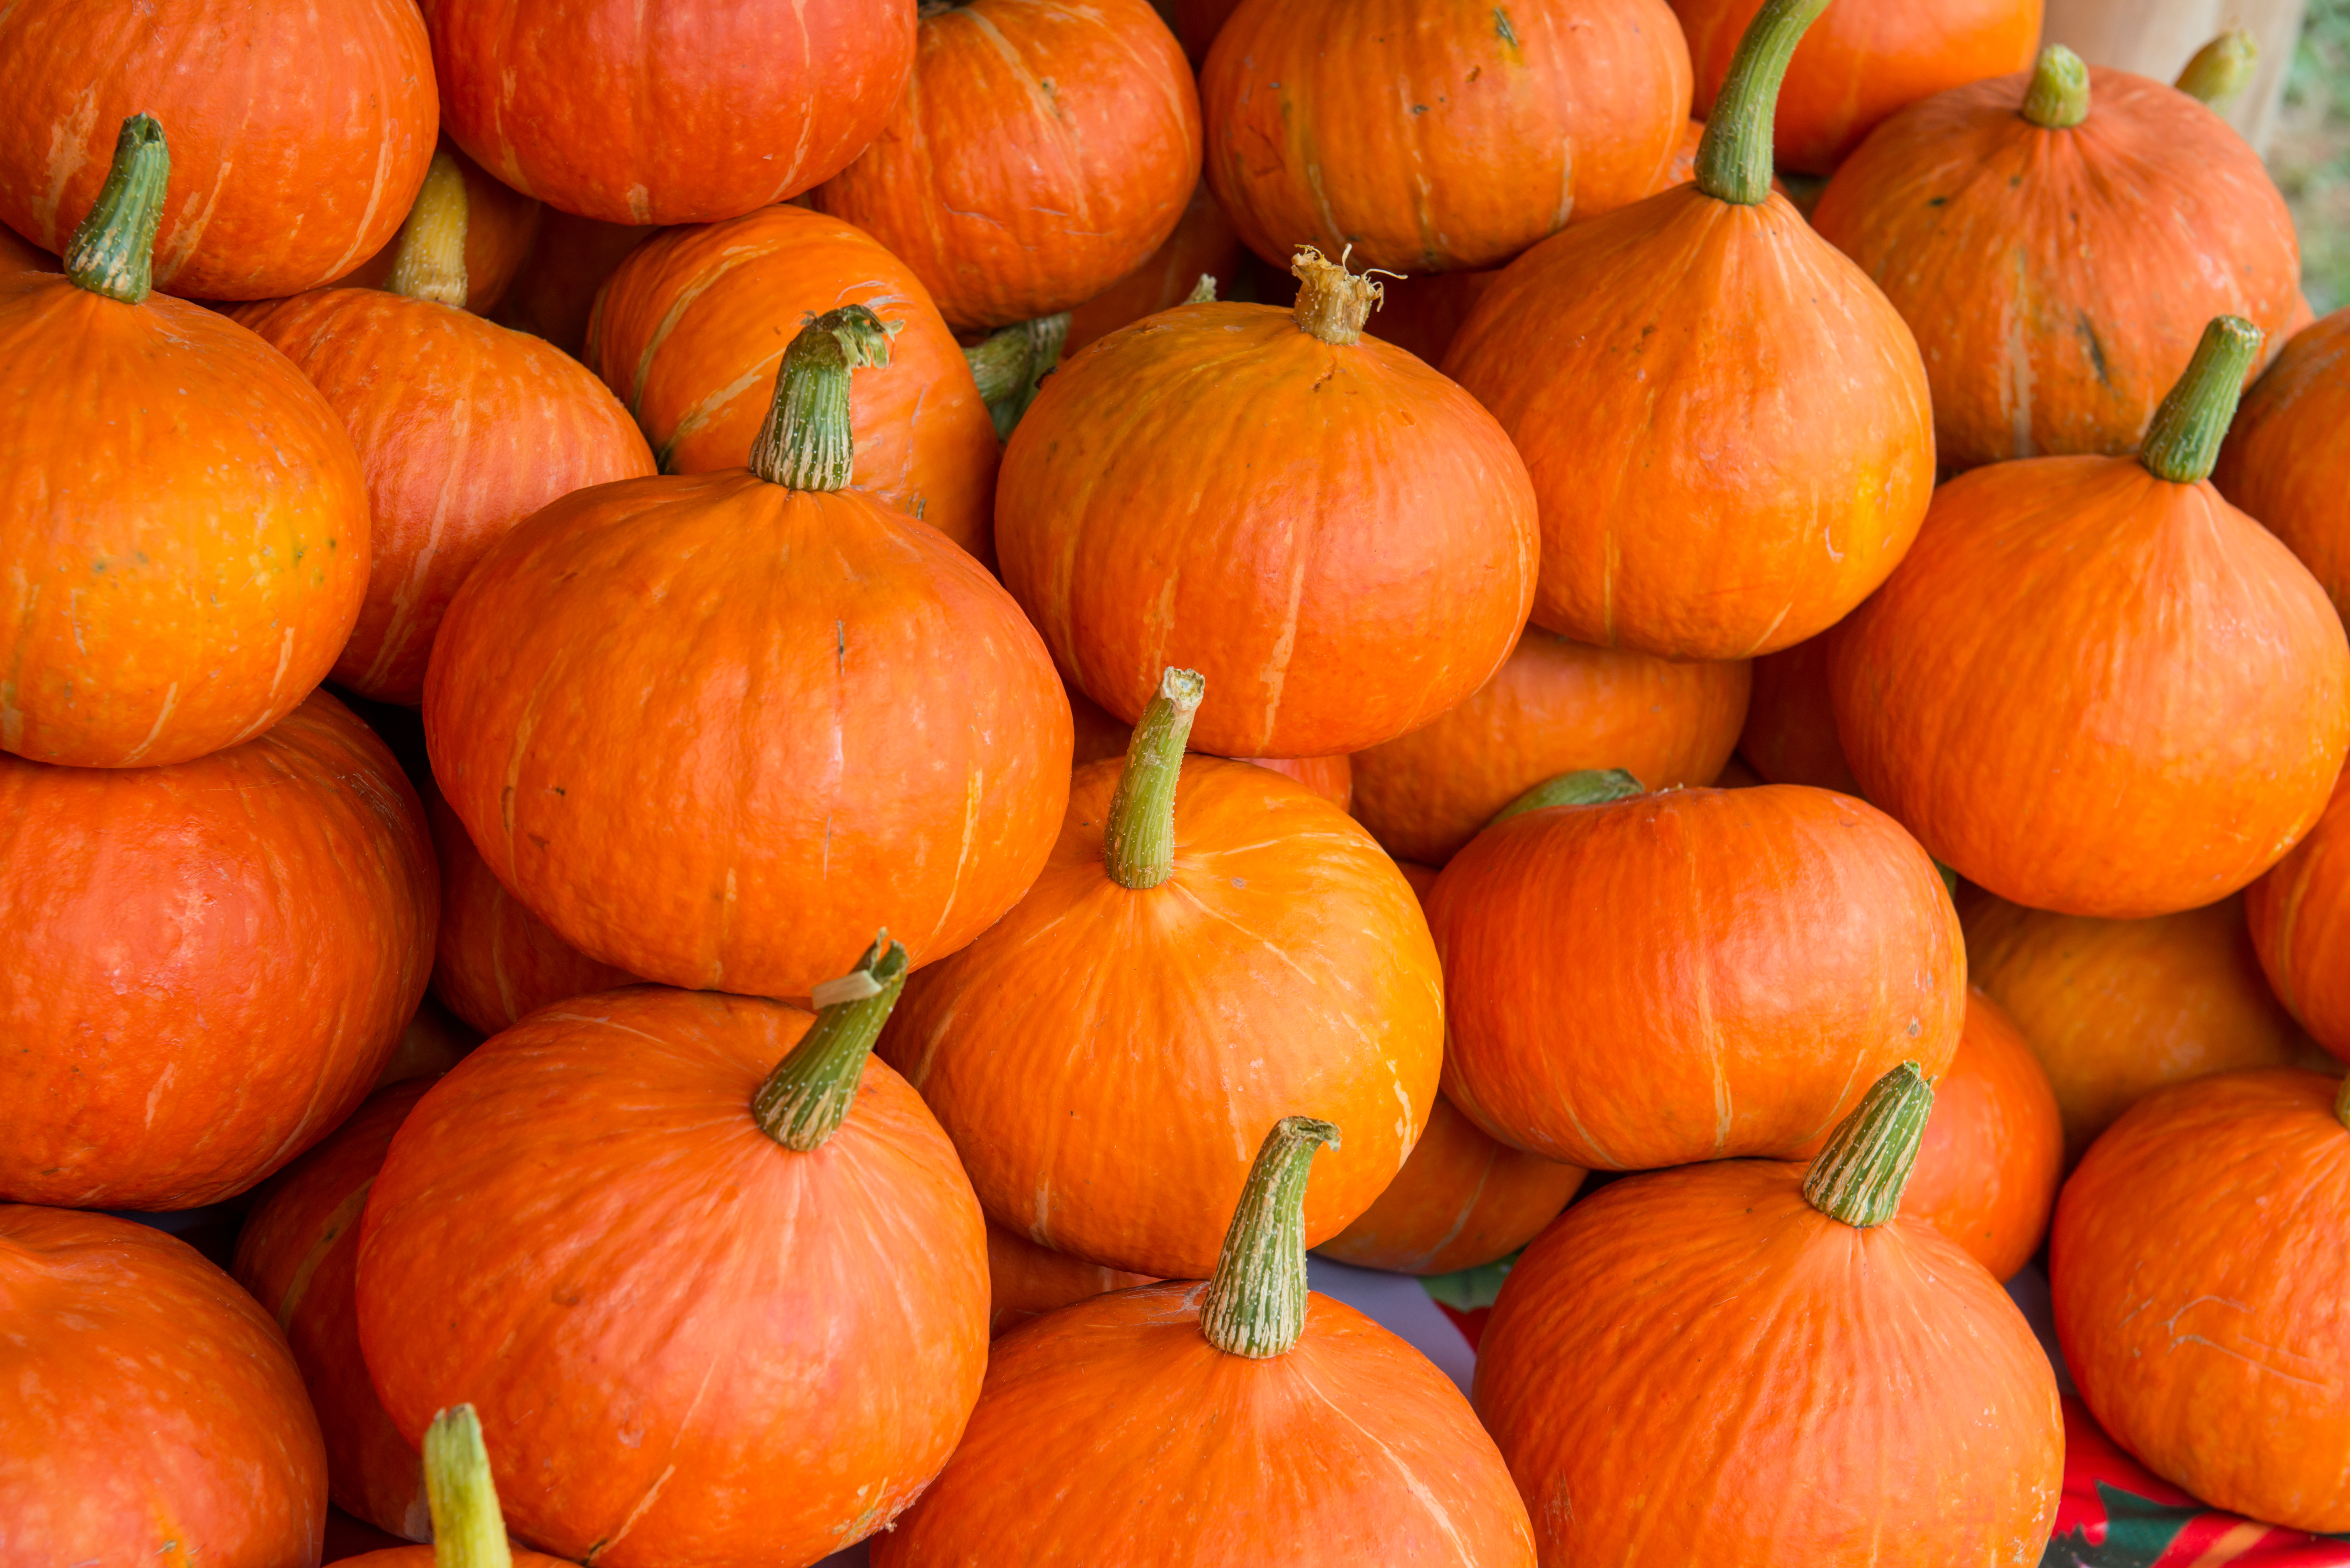 A pile of orange pumpkins with green stems.